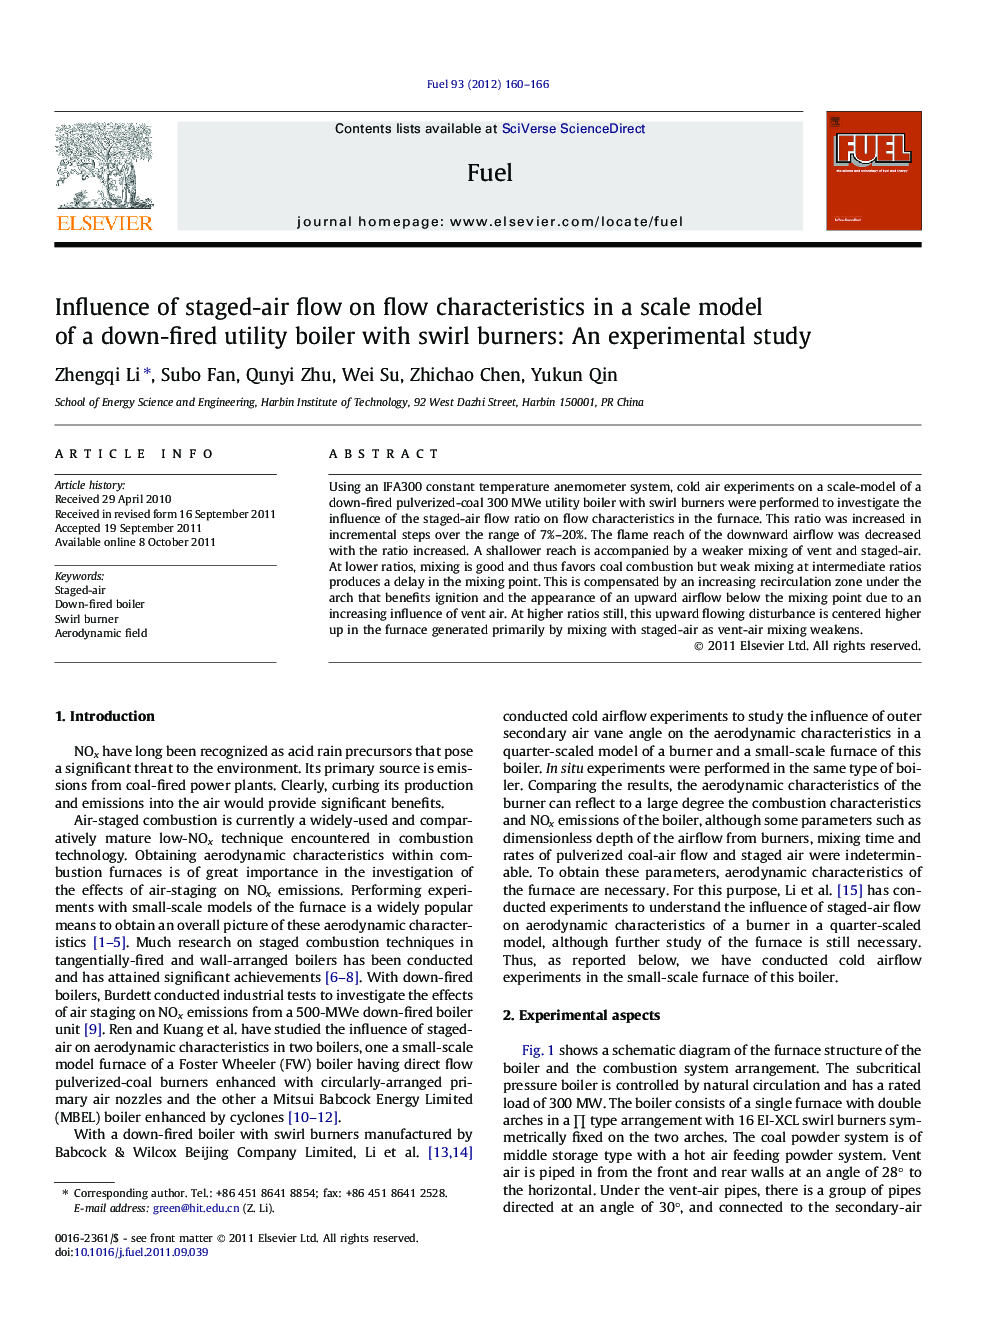 Influence of staged-air flow on flow characteristics in a scale model of a down-fired utility boiler with swirl burners: An experimental study